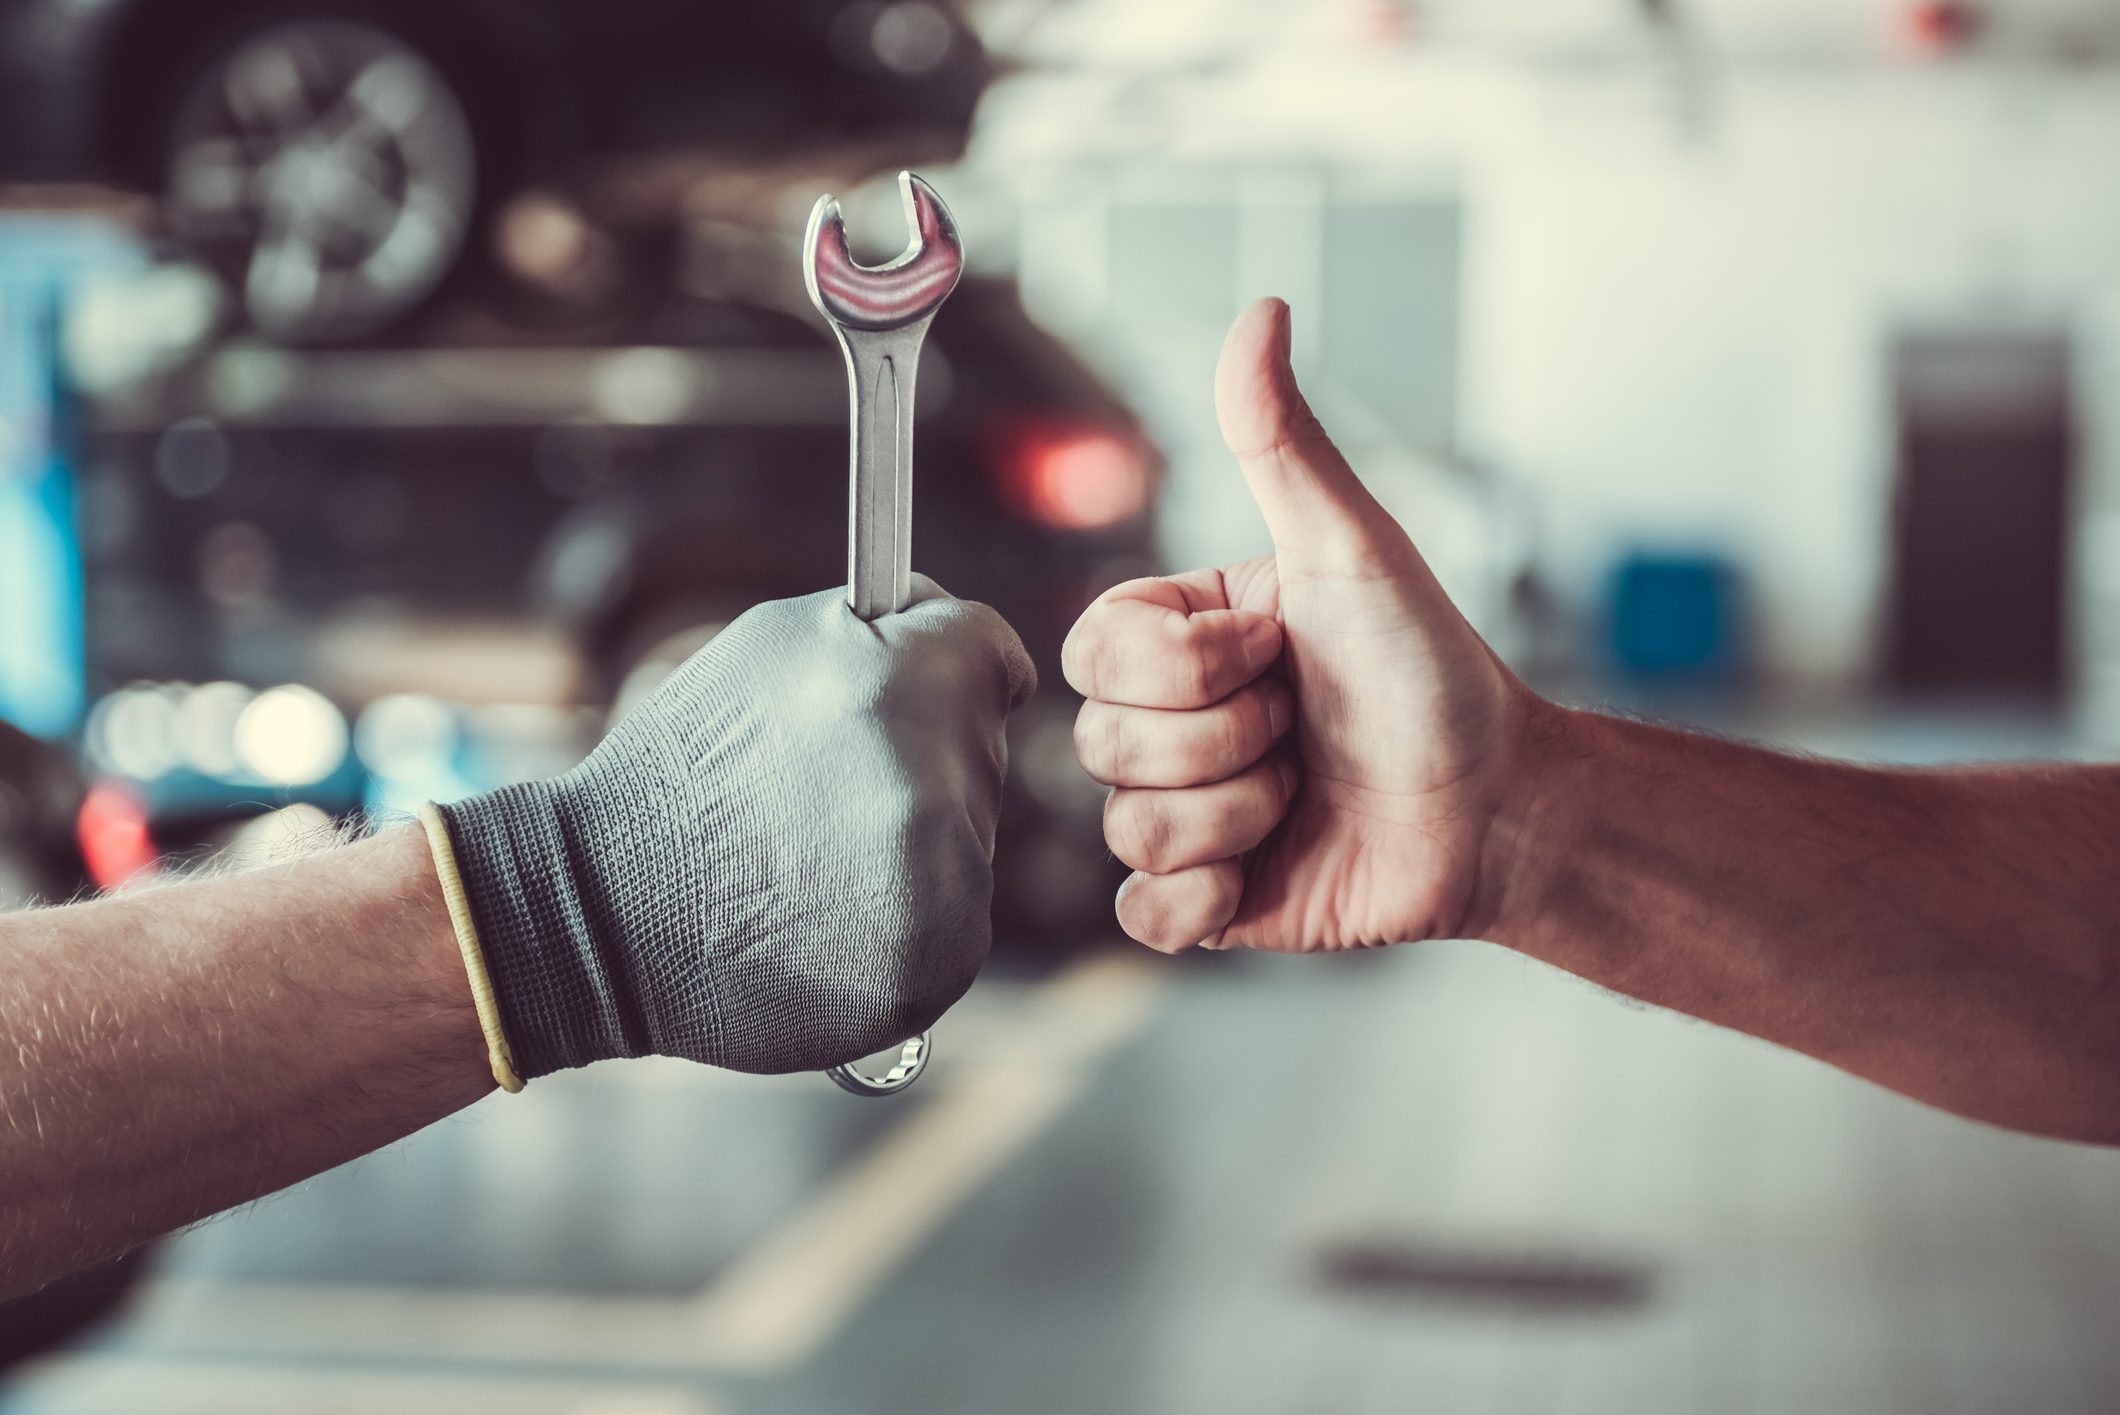 Mechanics Working in an Auto Repair Service Center, With One Hand Holding a Wrench and the Other Giving a Thumbs Up